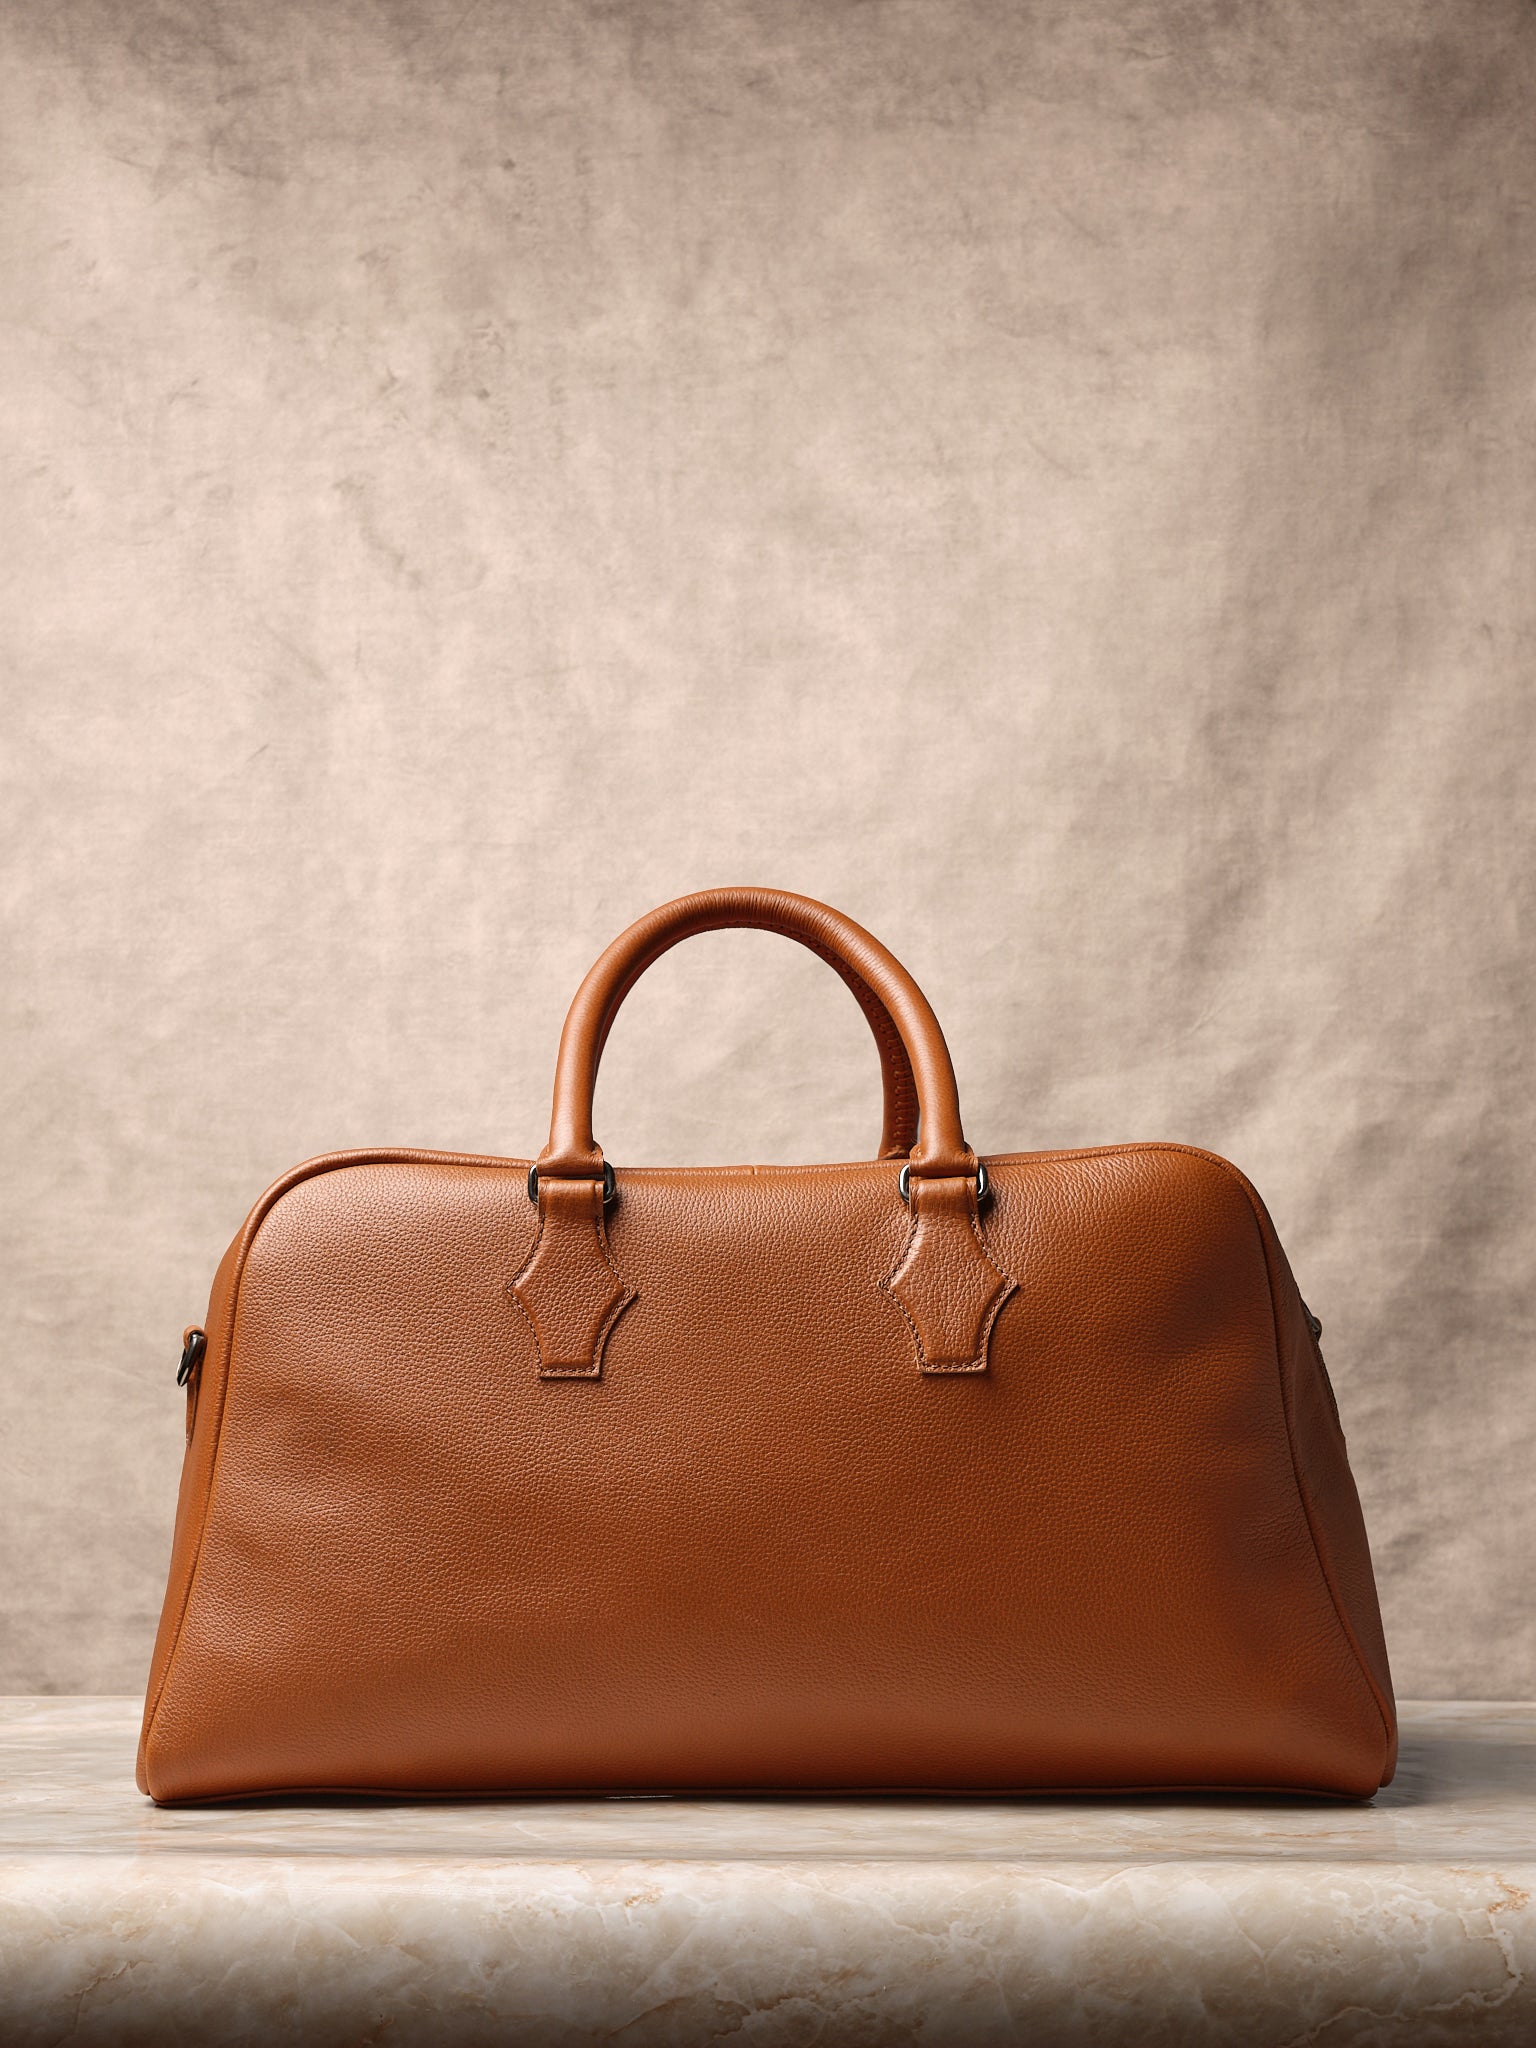 Leather Duffle Bag Mens Tan by Capra Leather